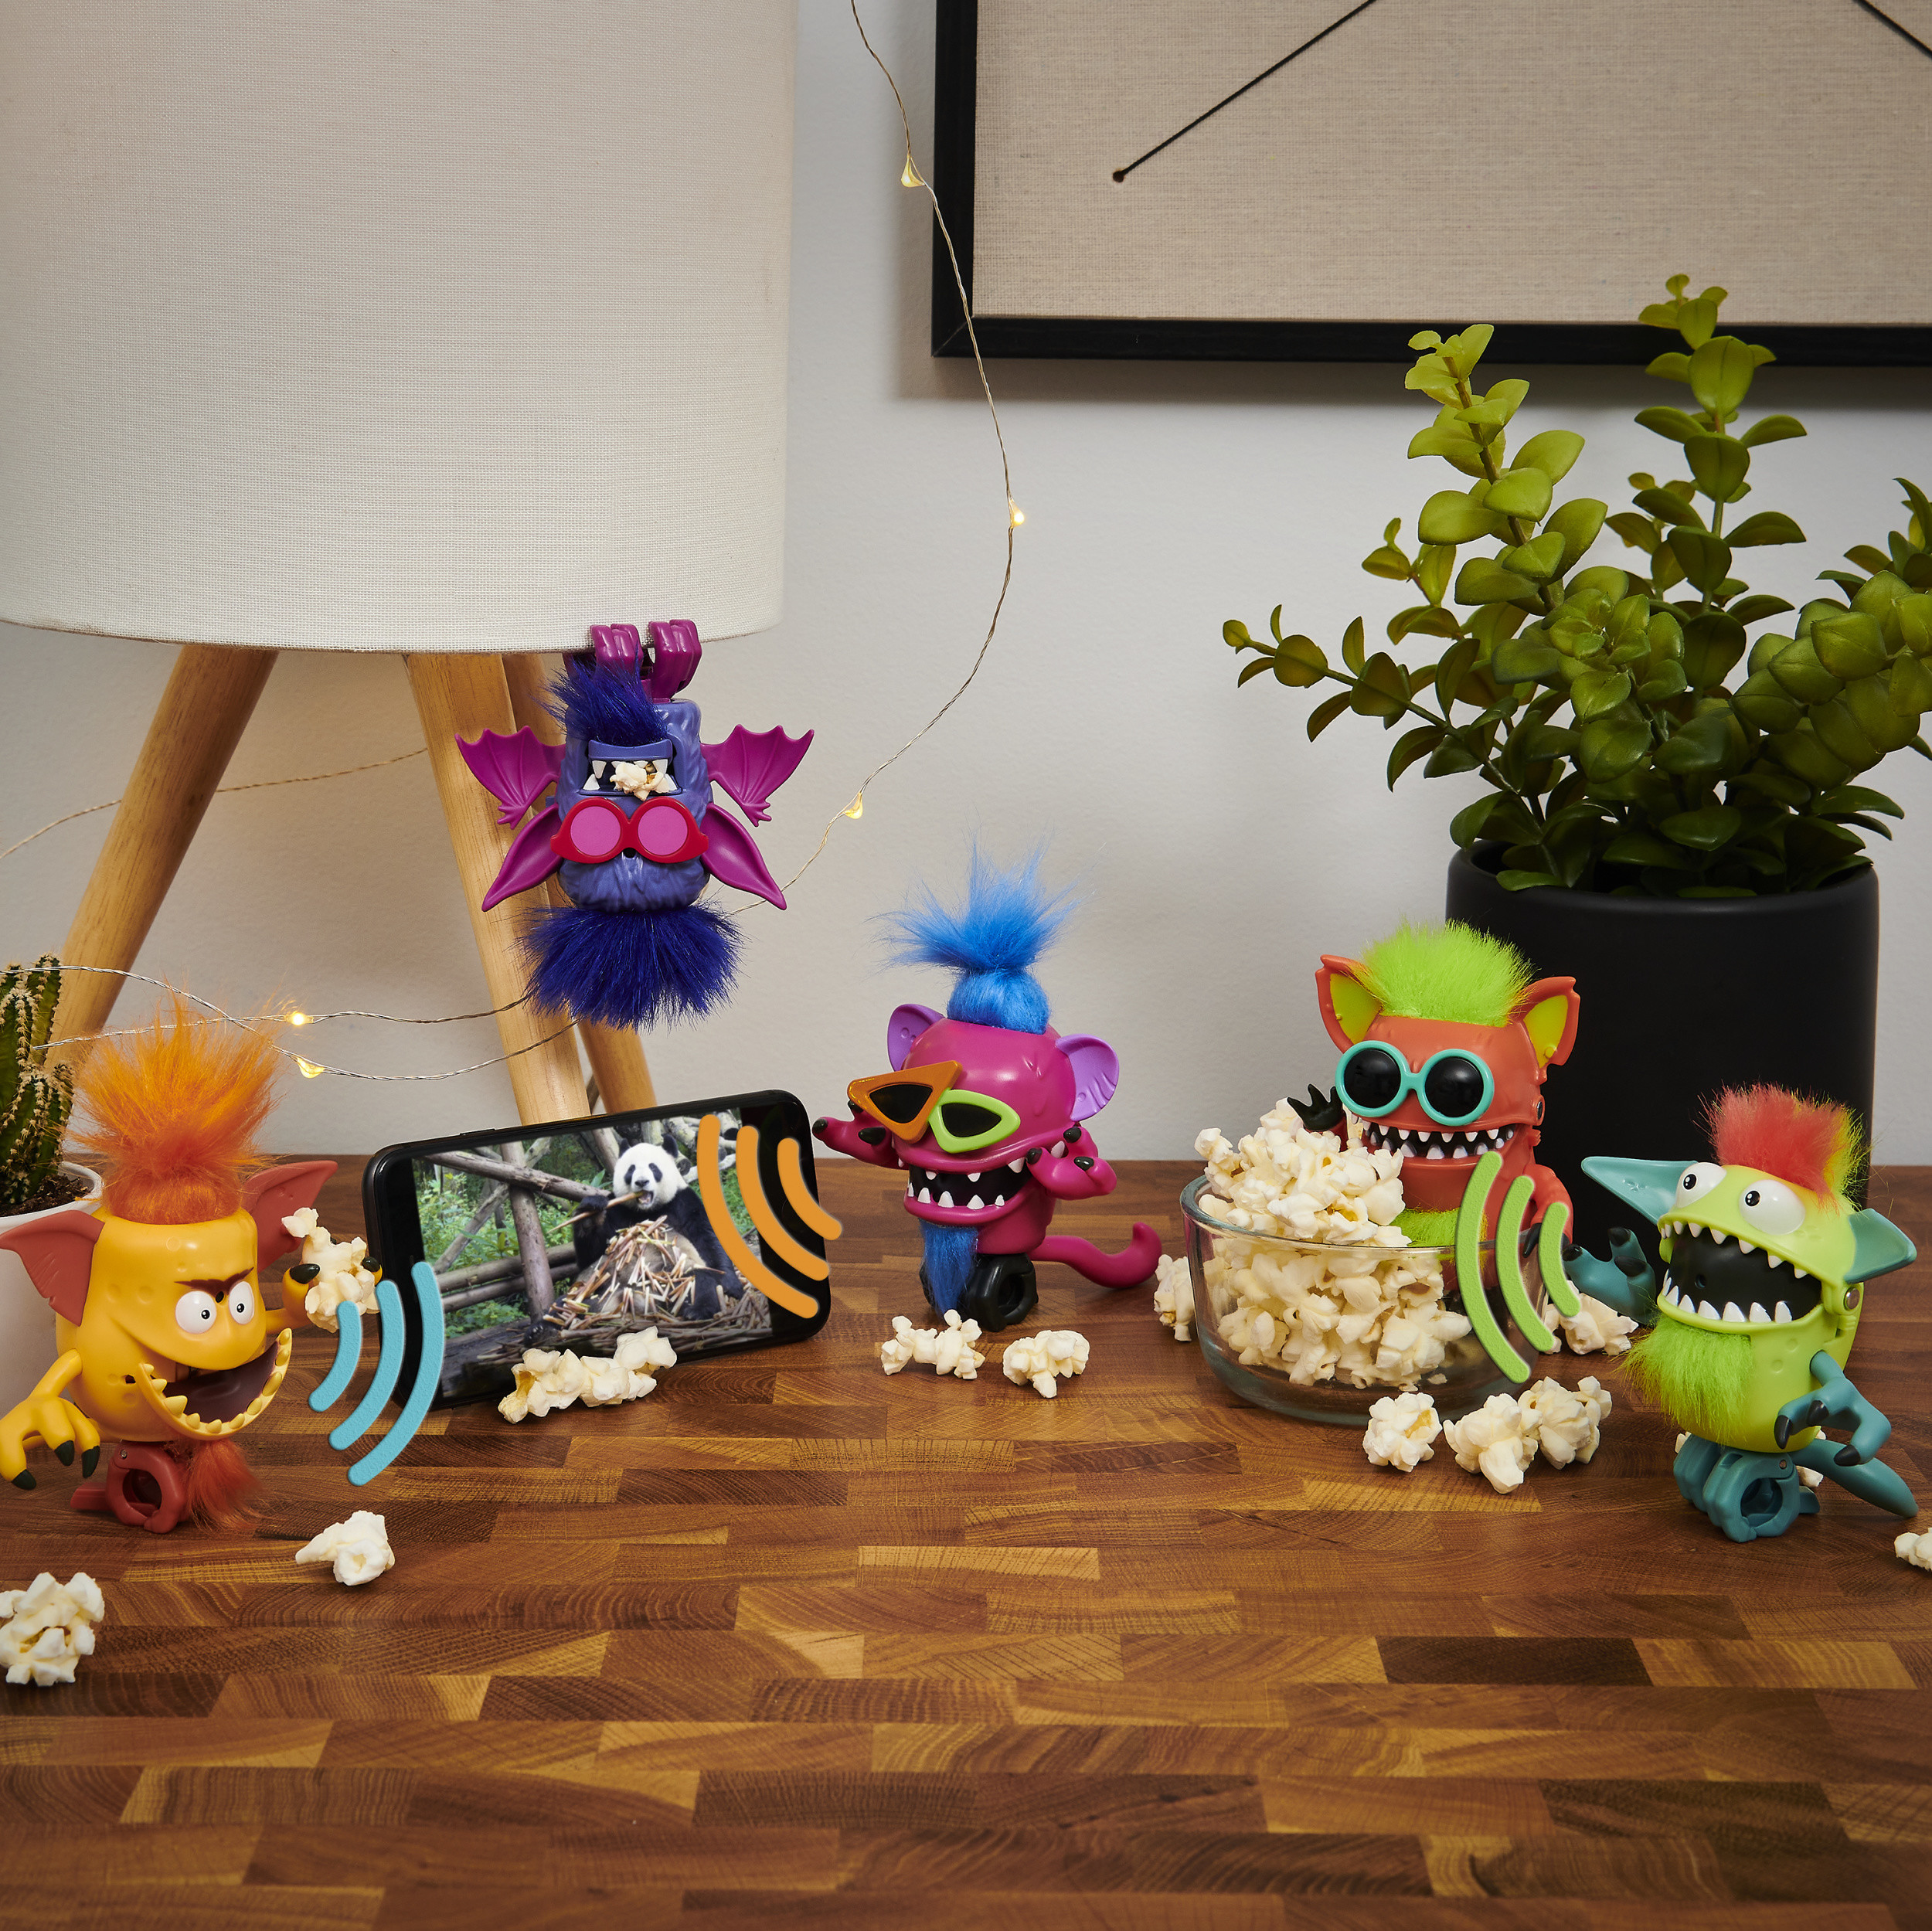 Scritterz, Battyz Interactive Collectible Jungle Creature Toy with Sounds and Movement, for Kids Aged 5 and up - image 6 of 8